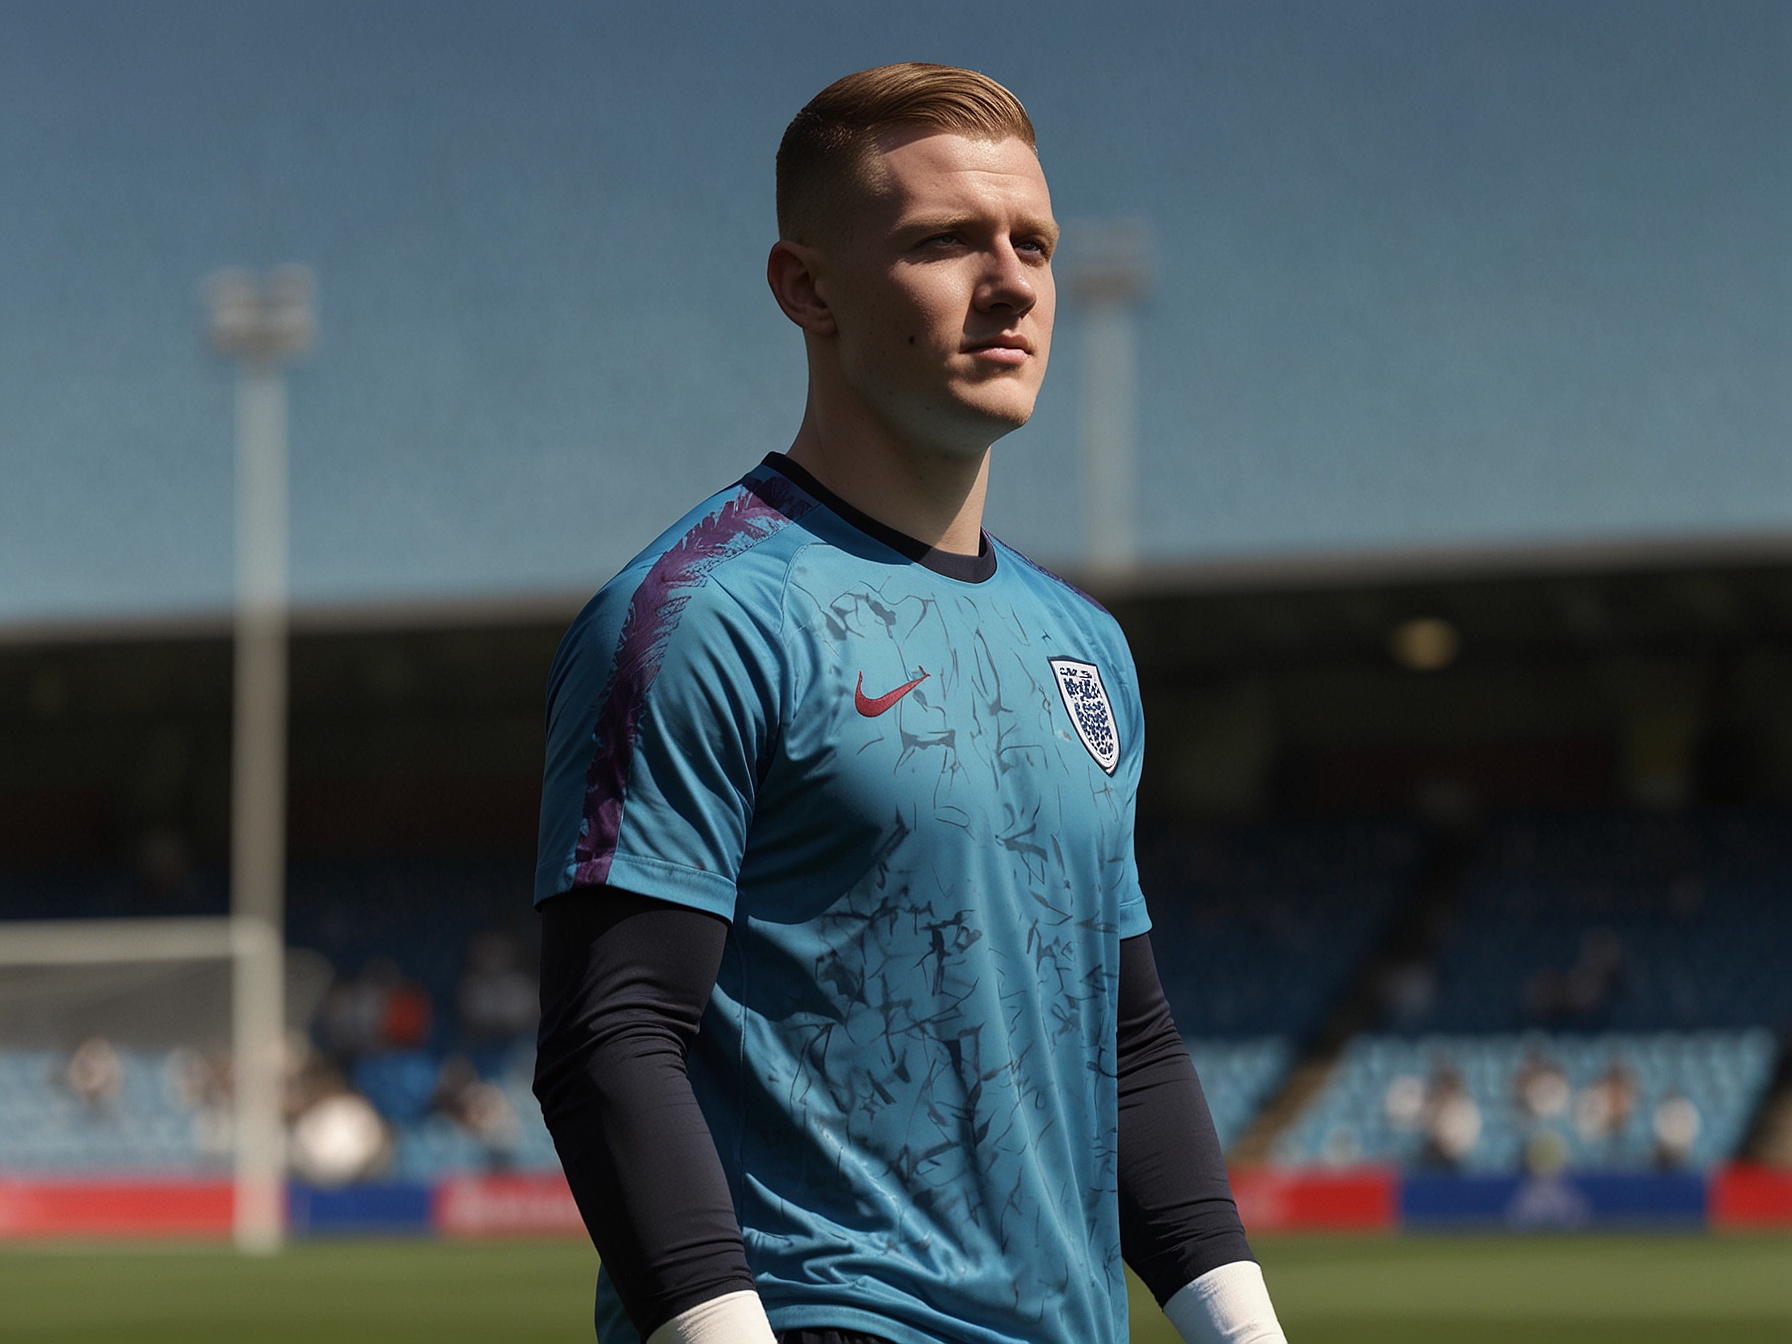 Jordan Pickford seen clutching his shoulder during an England training session, sparking concerns about his participation in the upcoming Euro 2024 qualifiers.